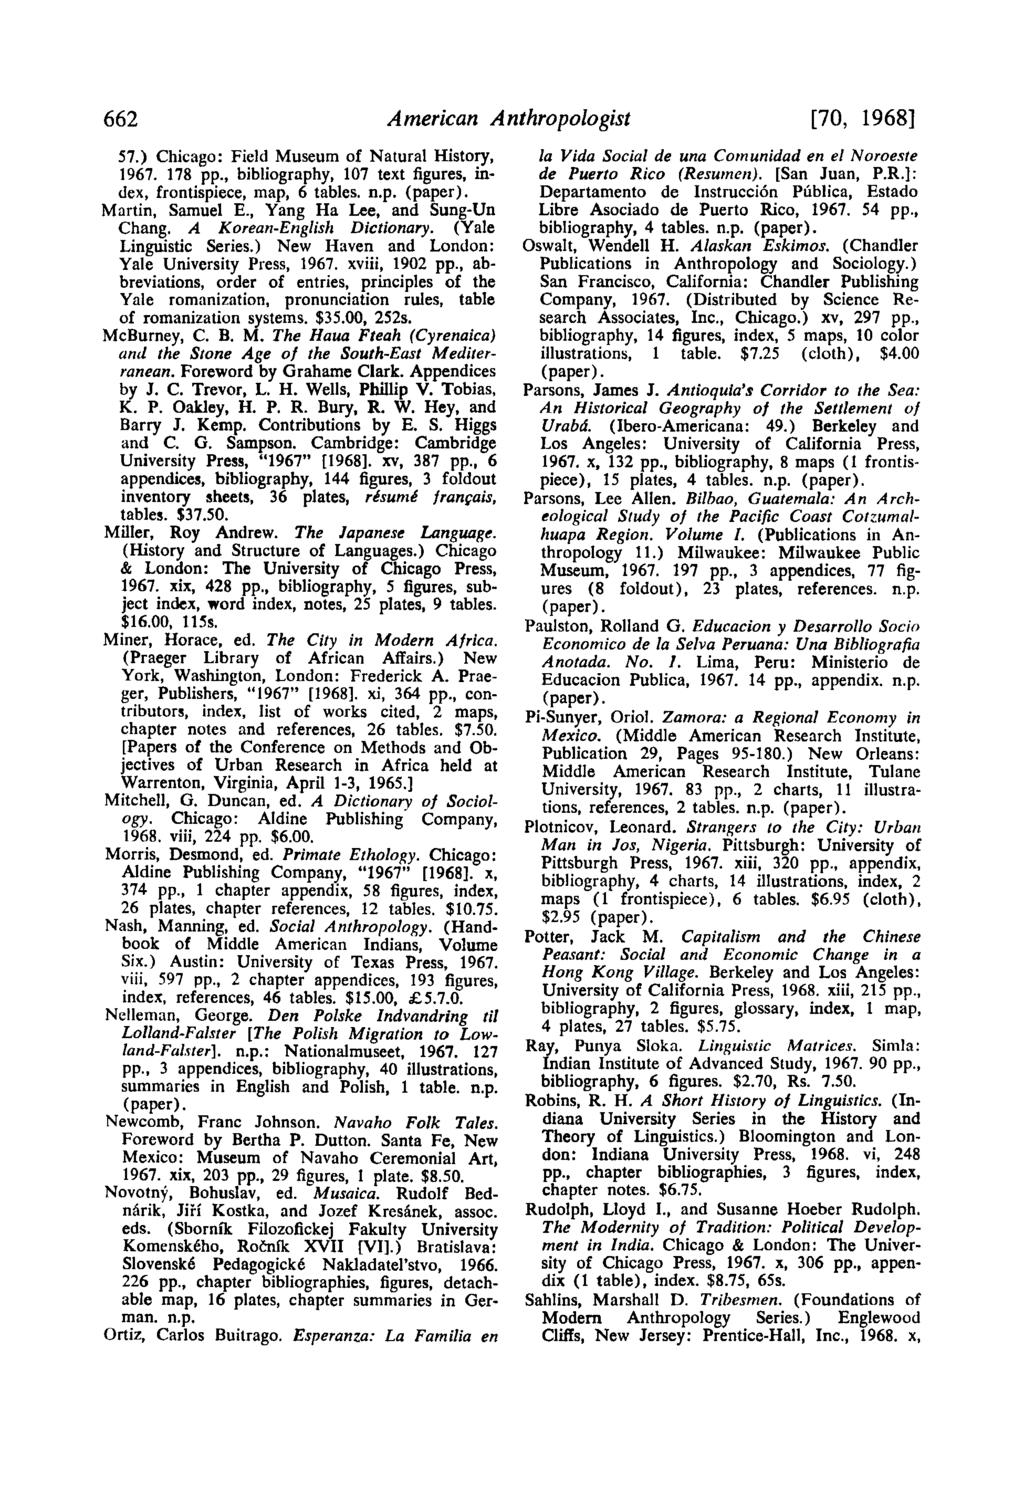 662 American Anthropologist [70, 19681 57.) Chicago: Field Museum of Natural History, 1967. 178 pp., bibliography, 107 text figures, index, frontispiece, map, 6 tables. n.p. Martin, Samuel E.